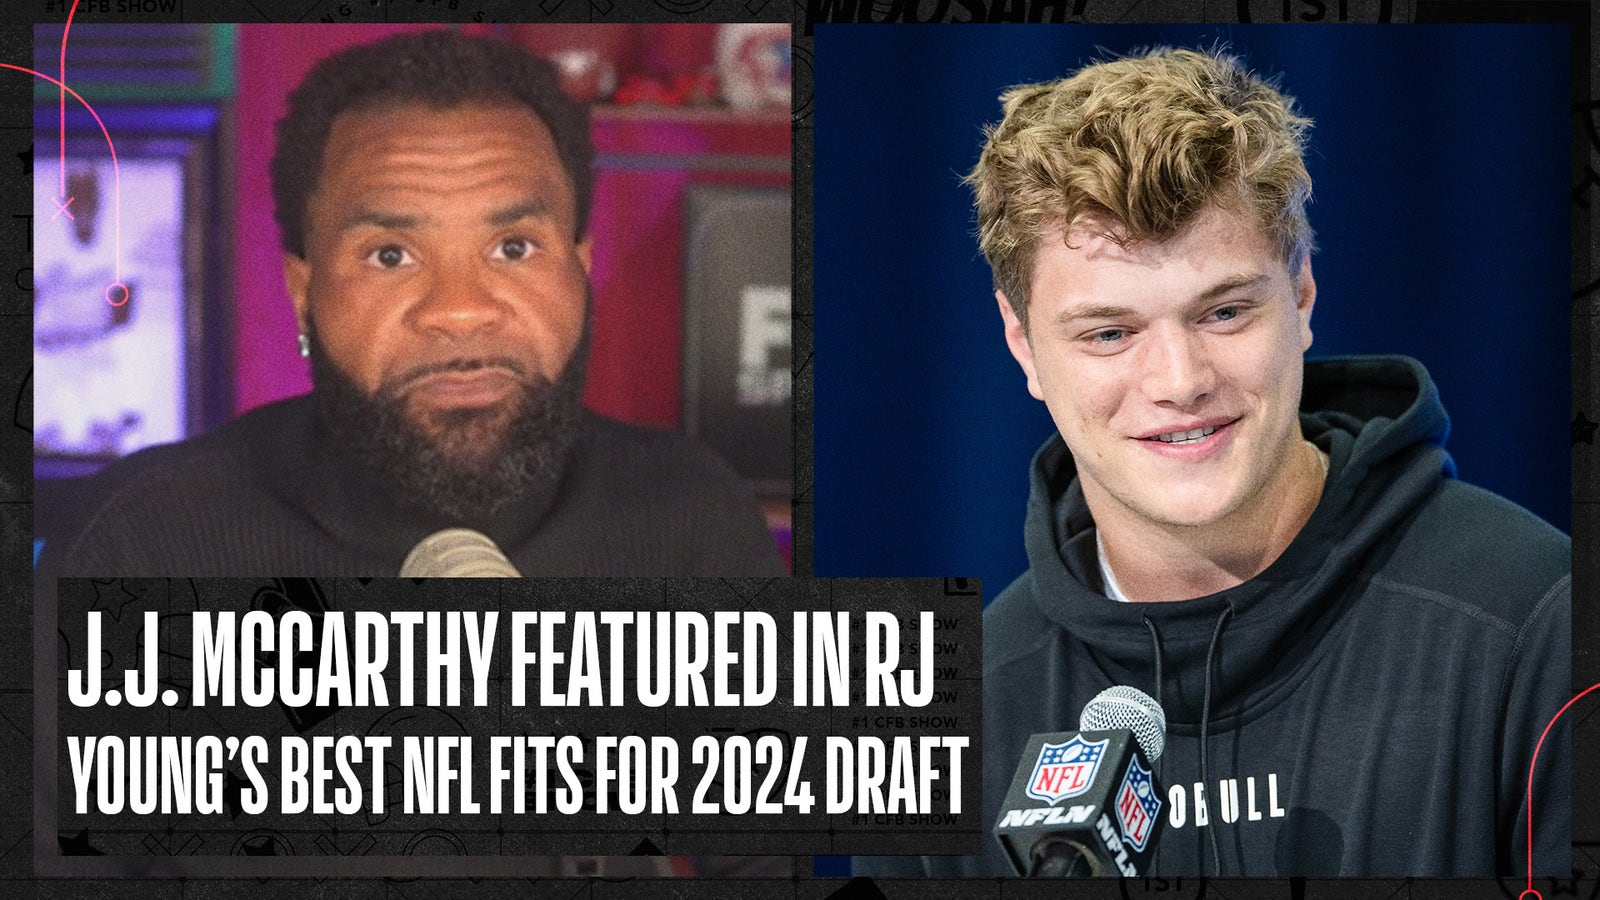 J.J. McCarthy among RJ Young’s best NFL fits for the draft 